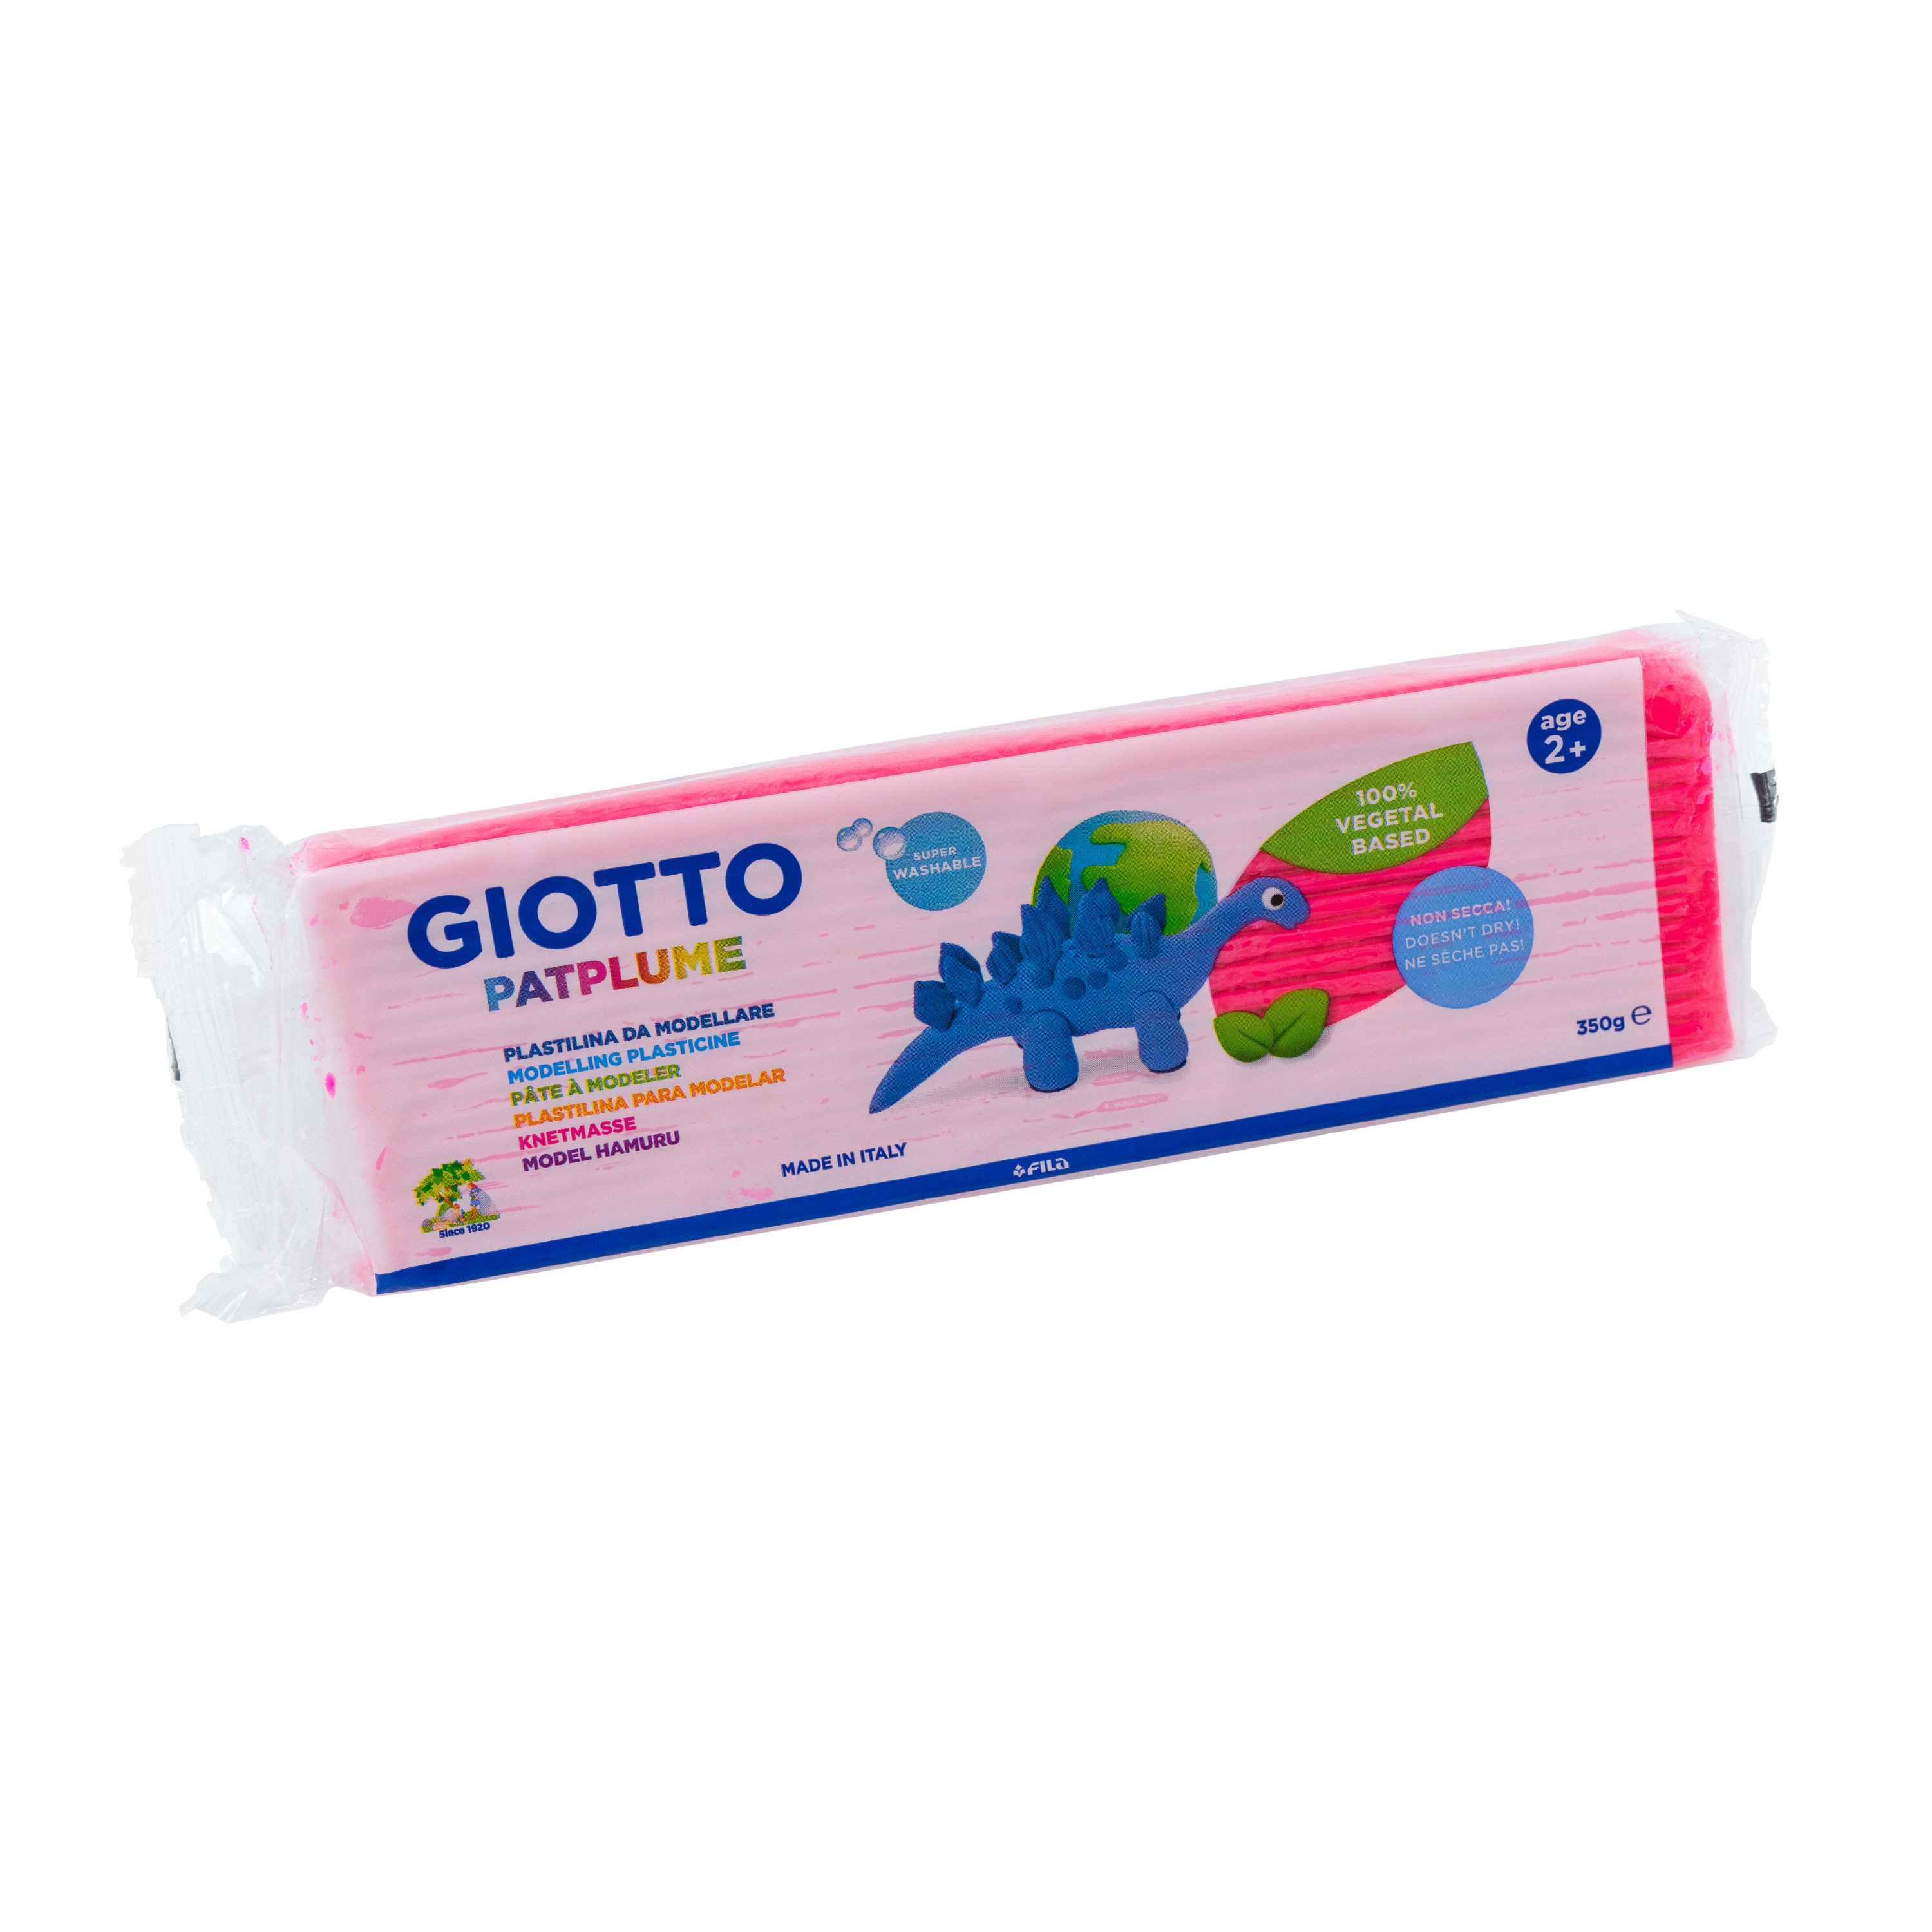 GIOTTO Patplume Modelliermasse 350 g, pink